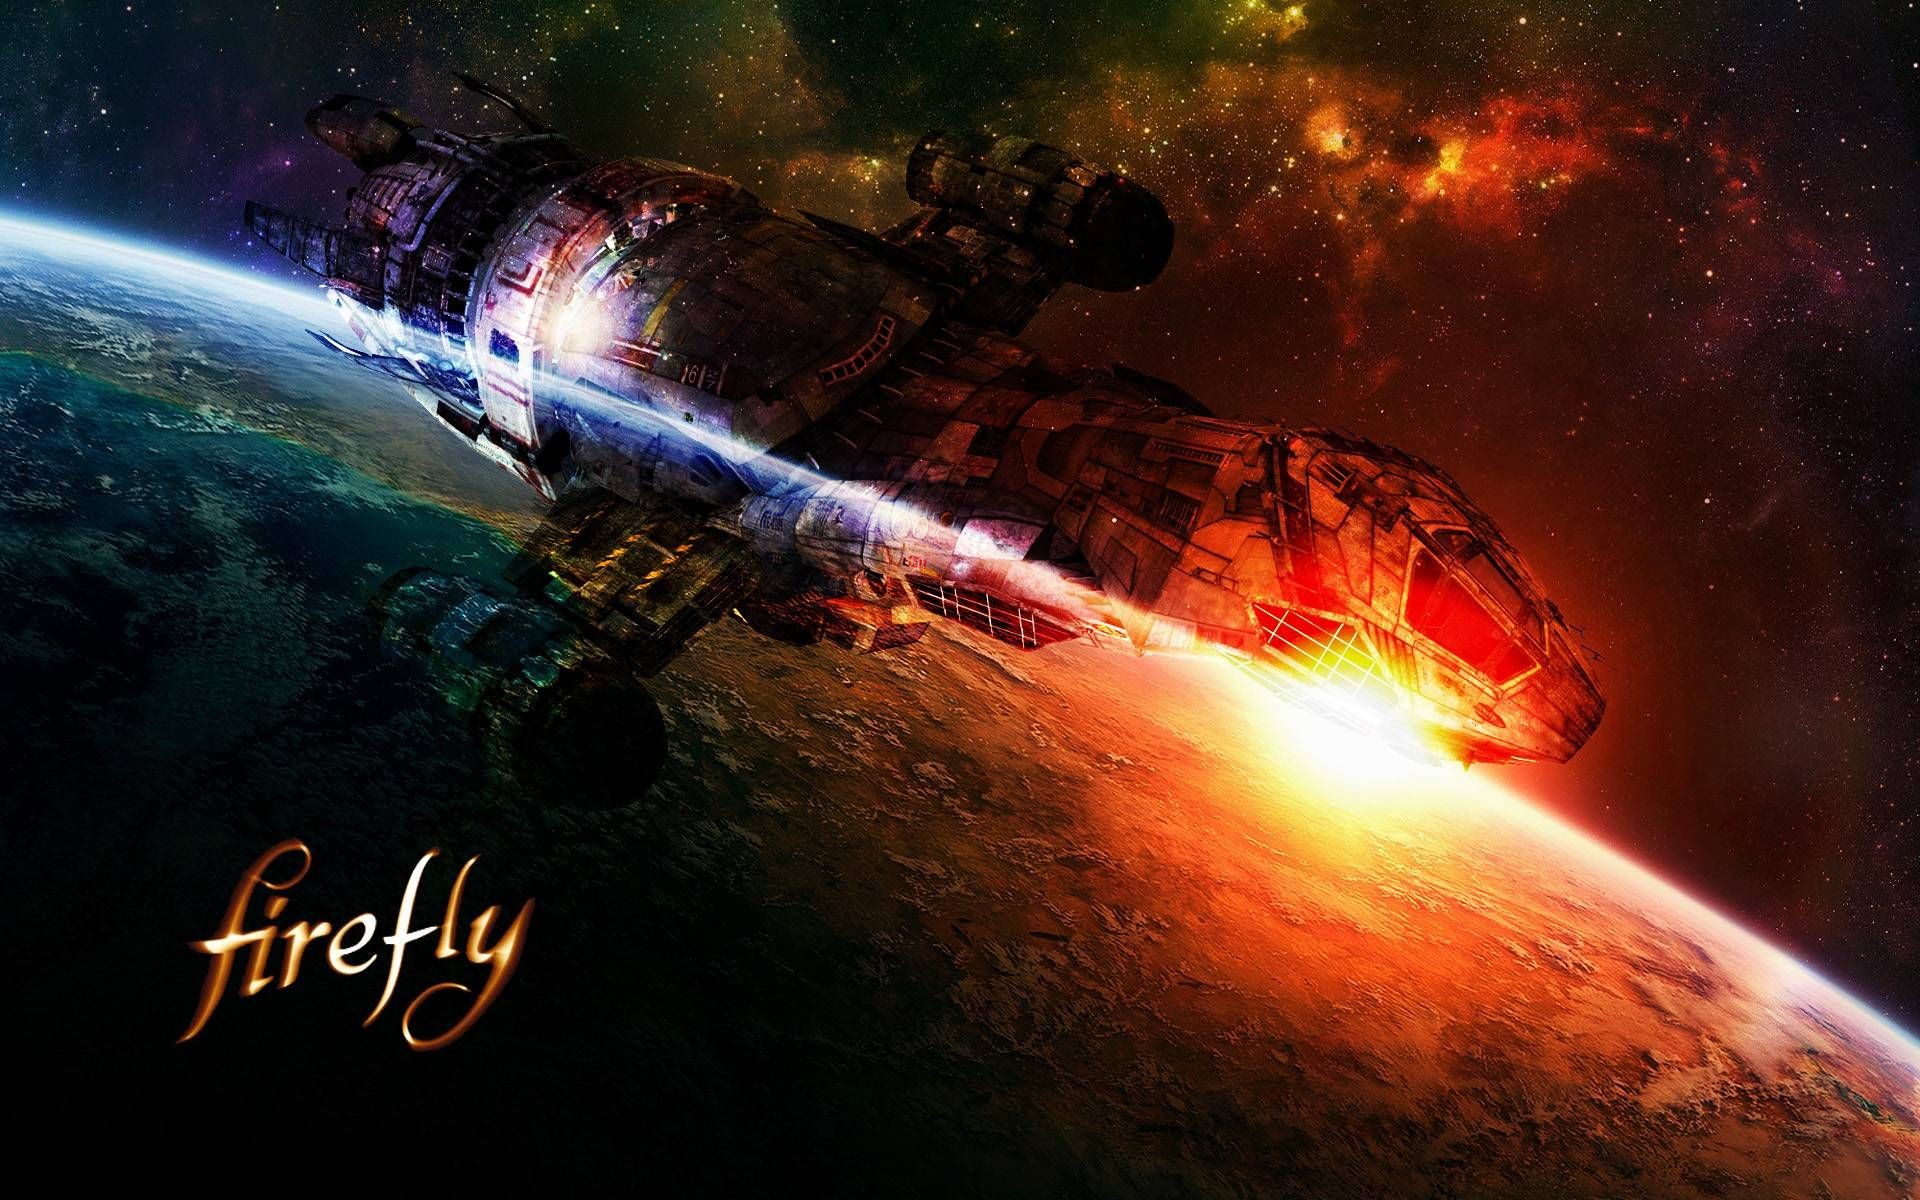 1920x1200 serenity firefly 1600x1200 wallpaper High Quality Wallpapers,High